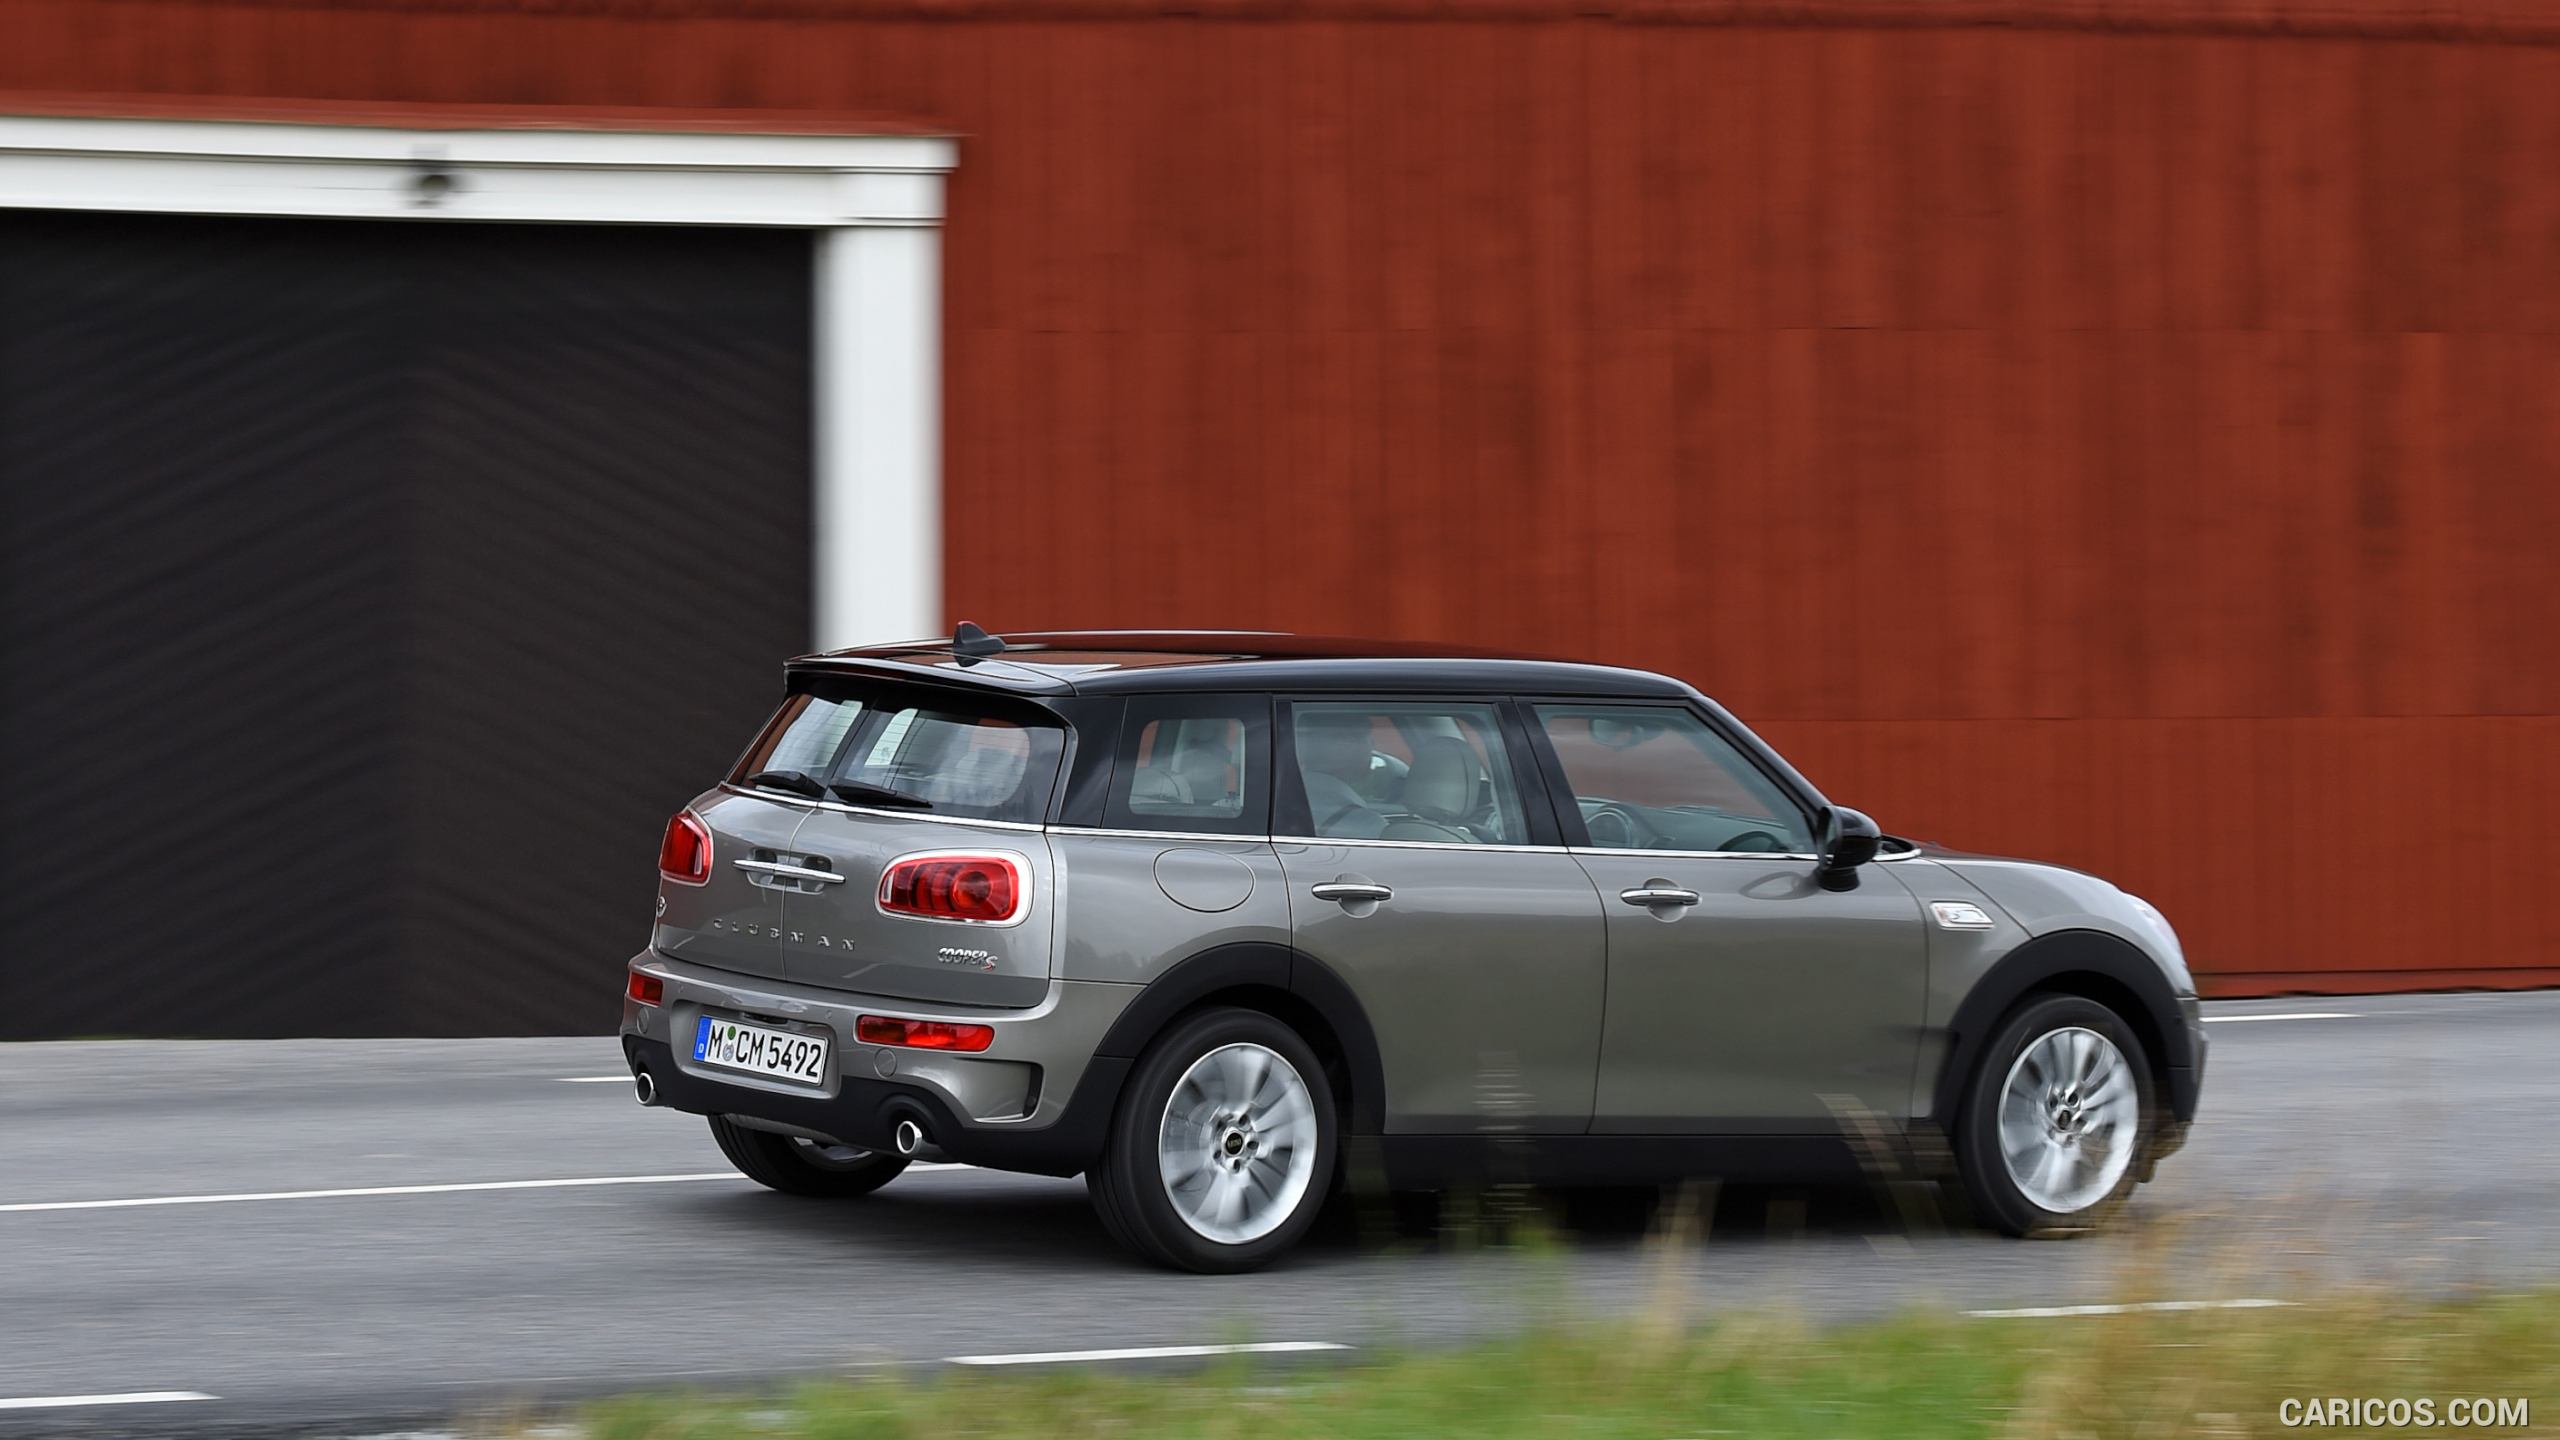 2016 MINI Cooper S Clubman in Metallic Melting Silver - Side, #201 of 380